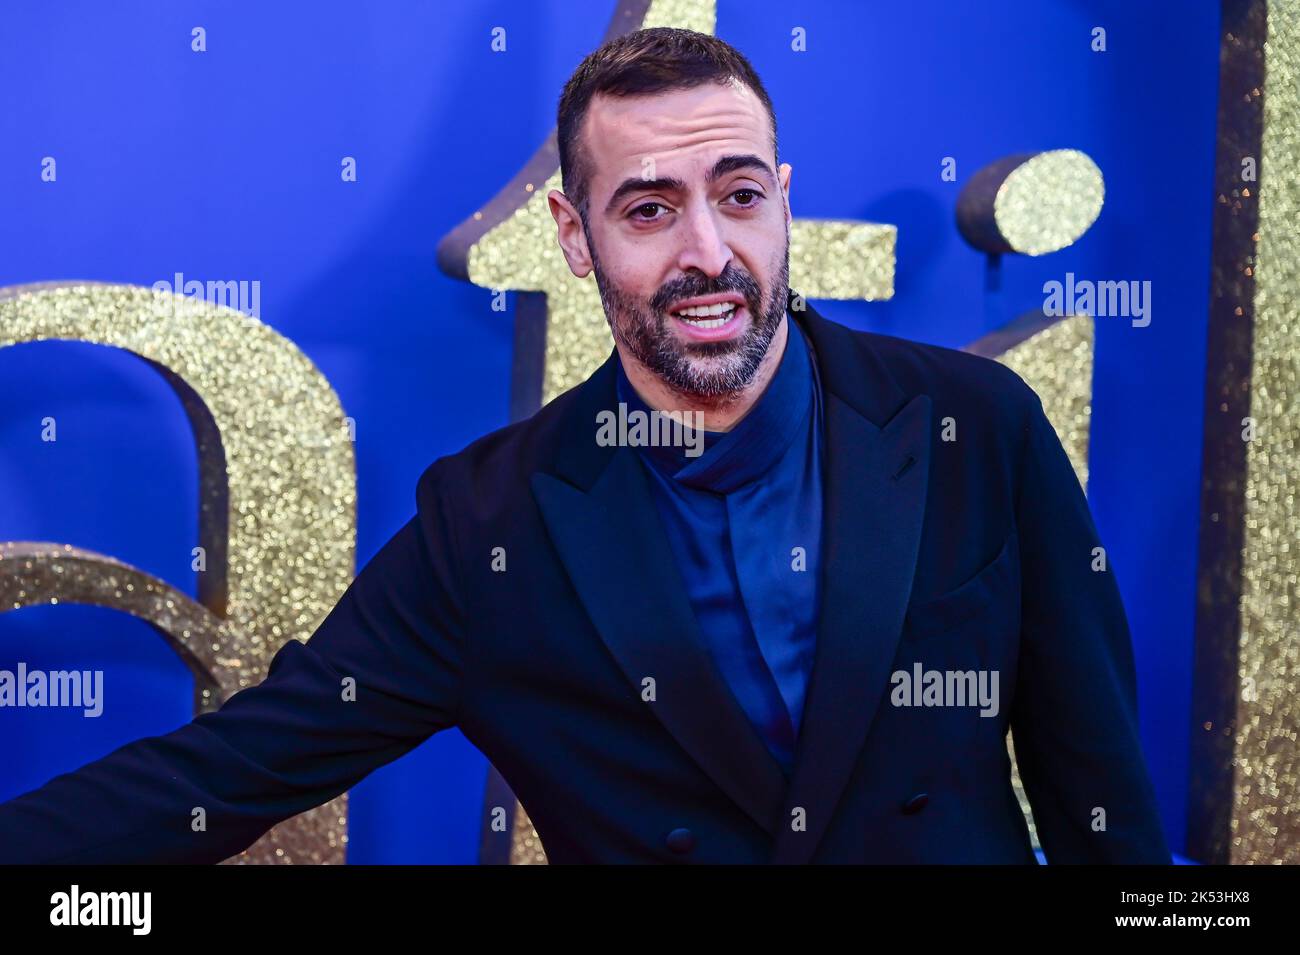 London, UK , 05/10/2022, Mohammed Al Turki Arrive at the Cast and filmmakers attend the BFI London Film Festival press conference for Roald Dahl’s Matilda The Musical, released by Sony Pictures in cinemas across the UK & Ireland on November 25th -  5th October 2022, London, UK. Stock Photo